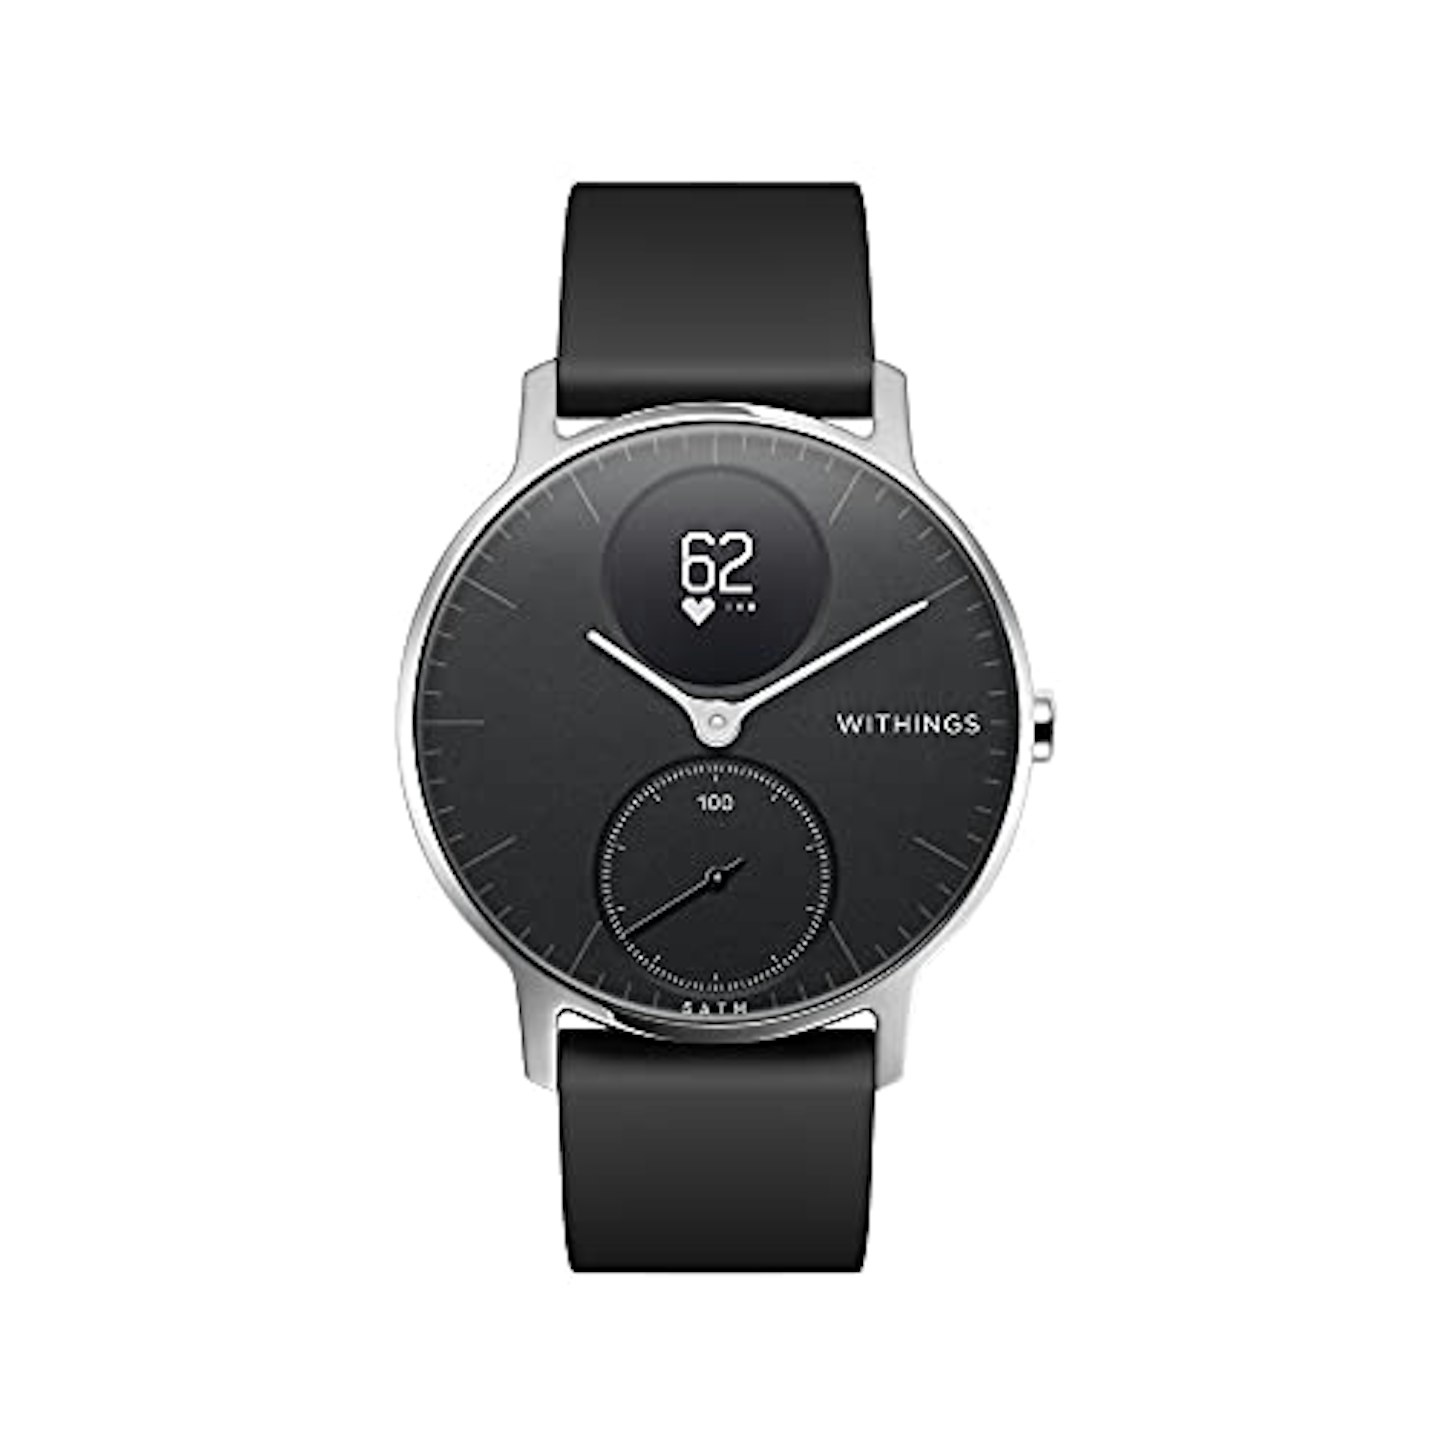 Withthings x Nokia Steel HR Hybrid Smartwatch